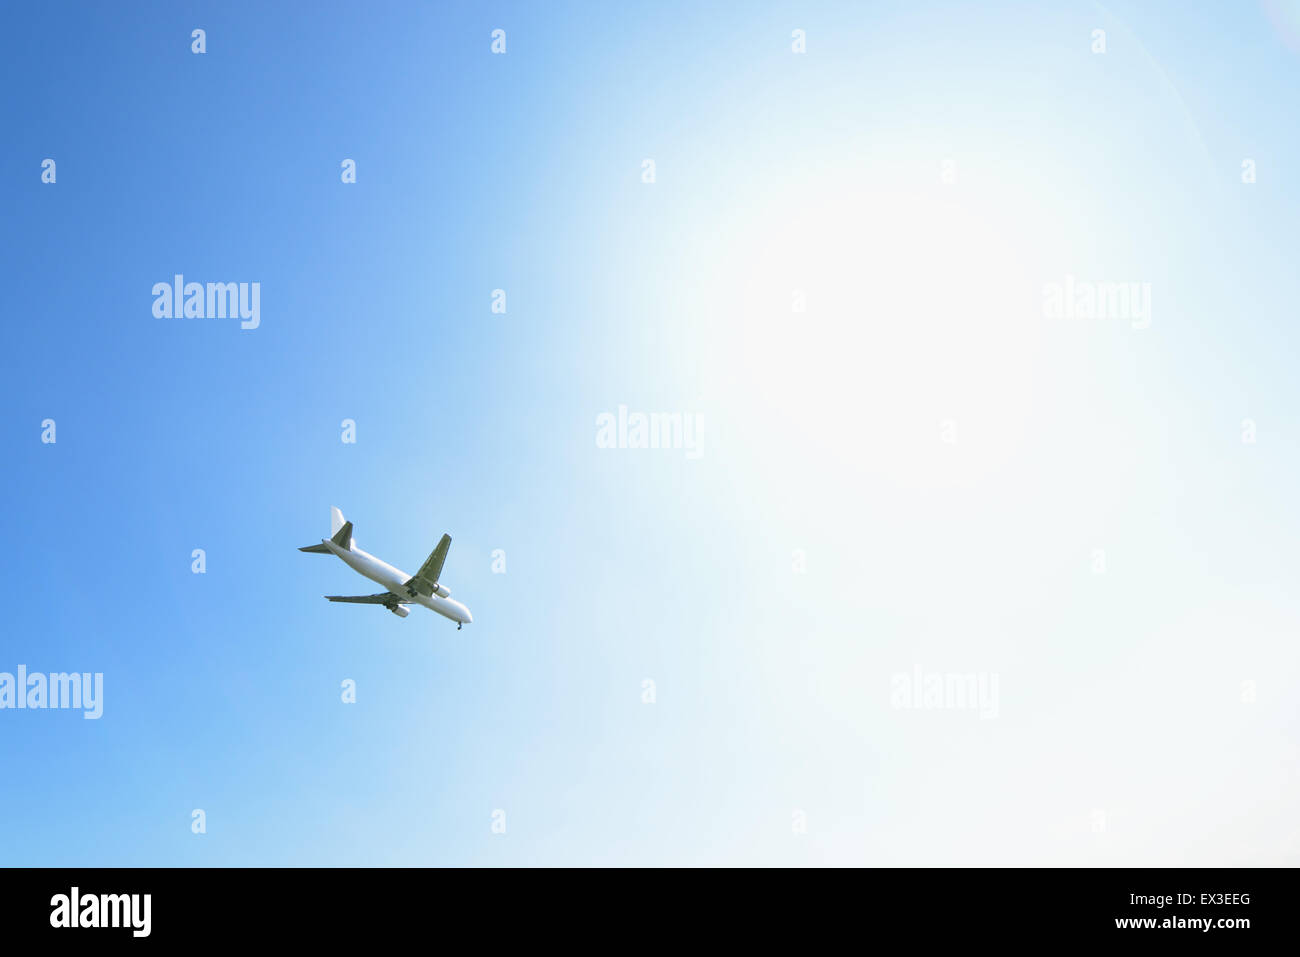 Airplane flying in the sky Stock Photo